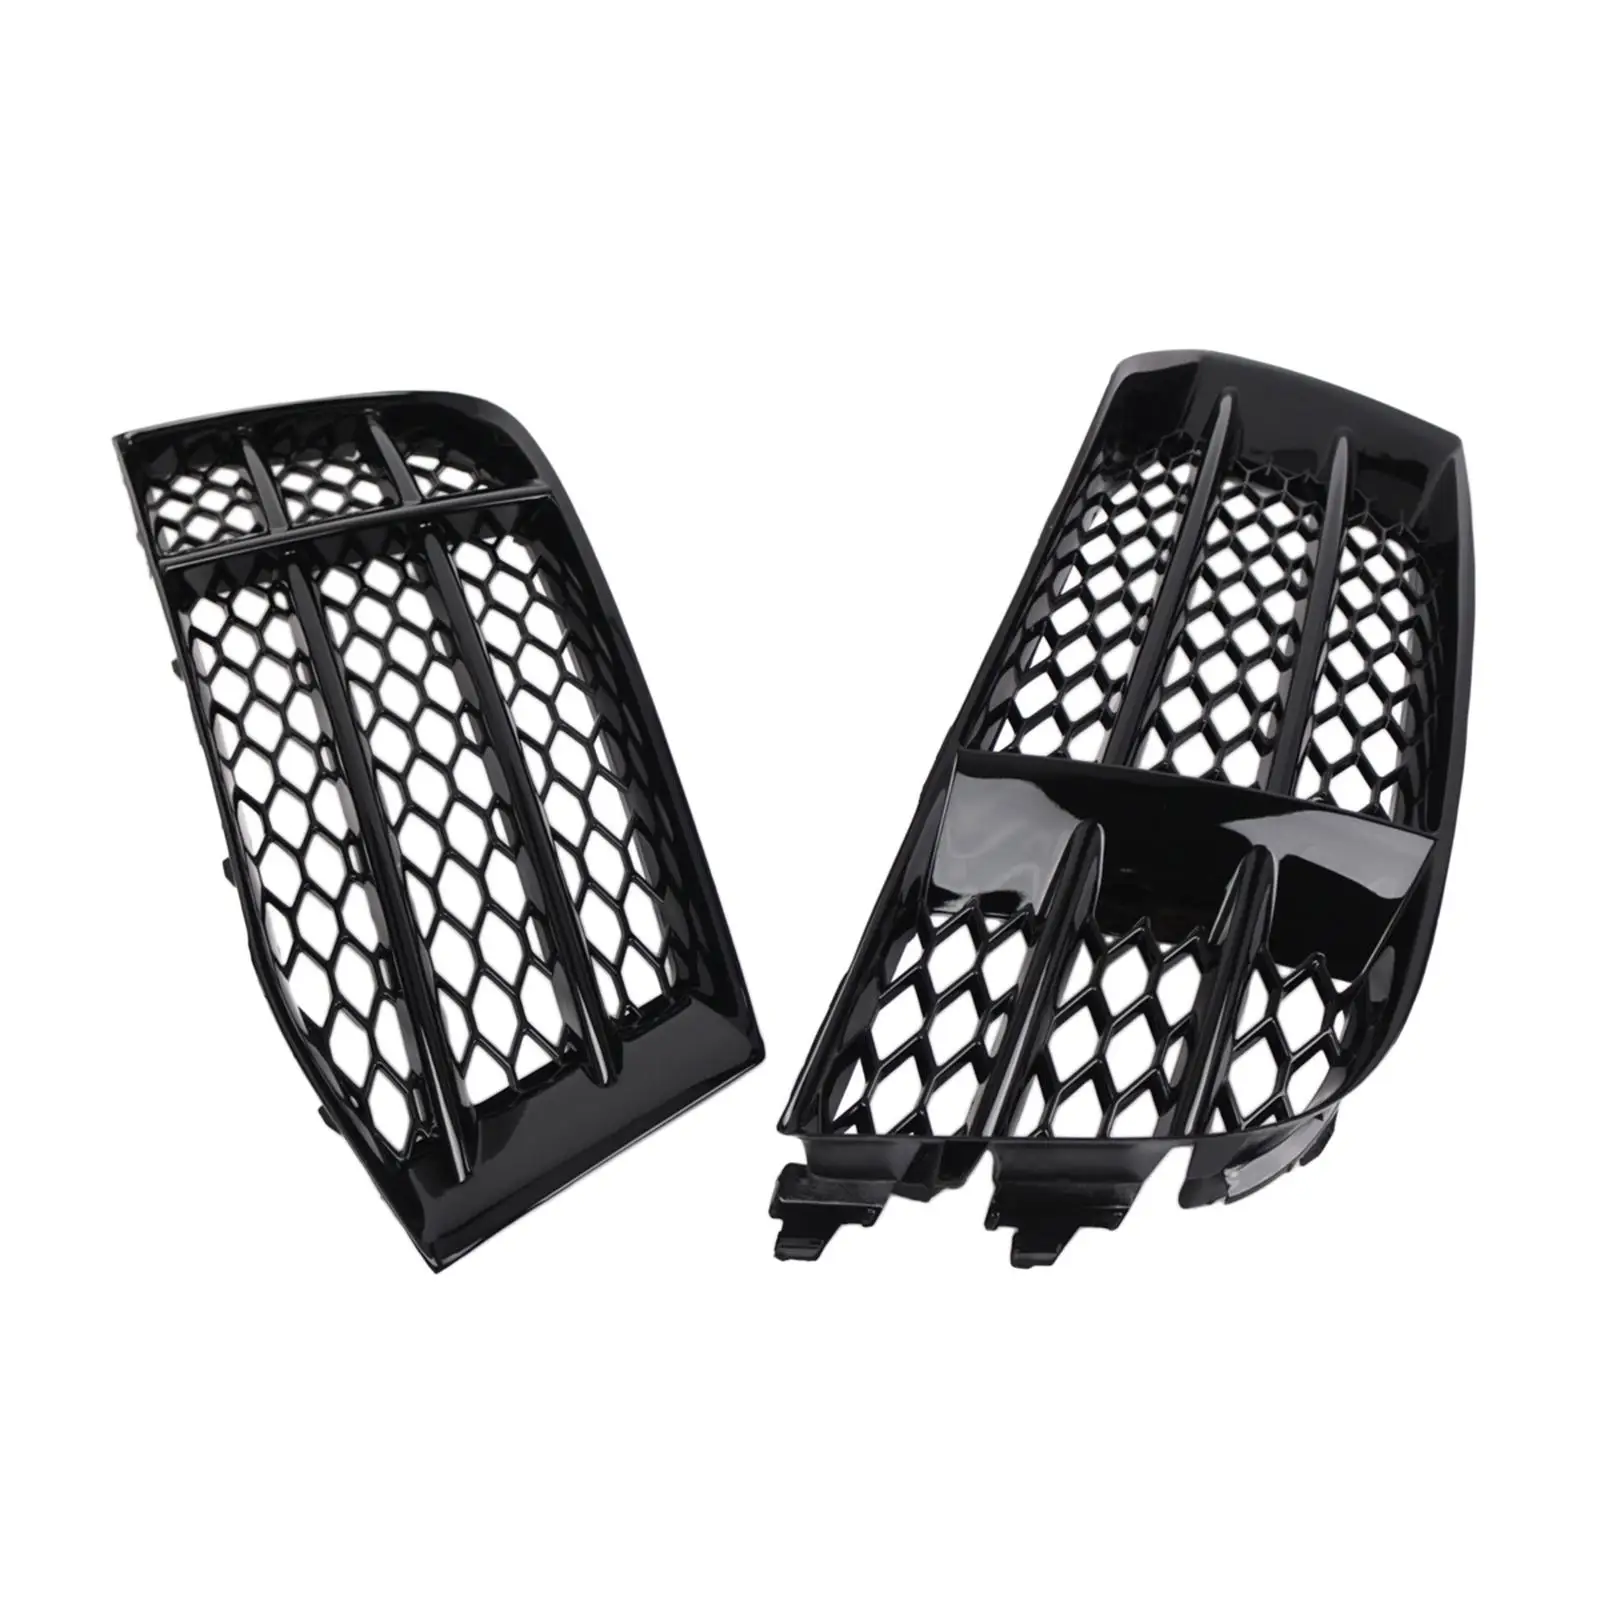 2 Pieces Front Bumper Grill Cover Mesh Grille Sturdy Professional High Performance for RS5 Sportback Vehicle Repair Parts